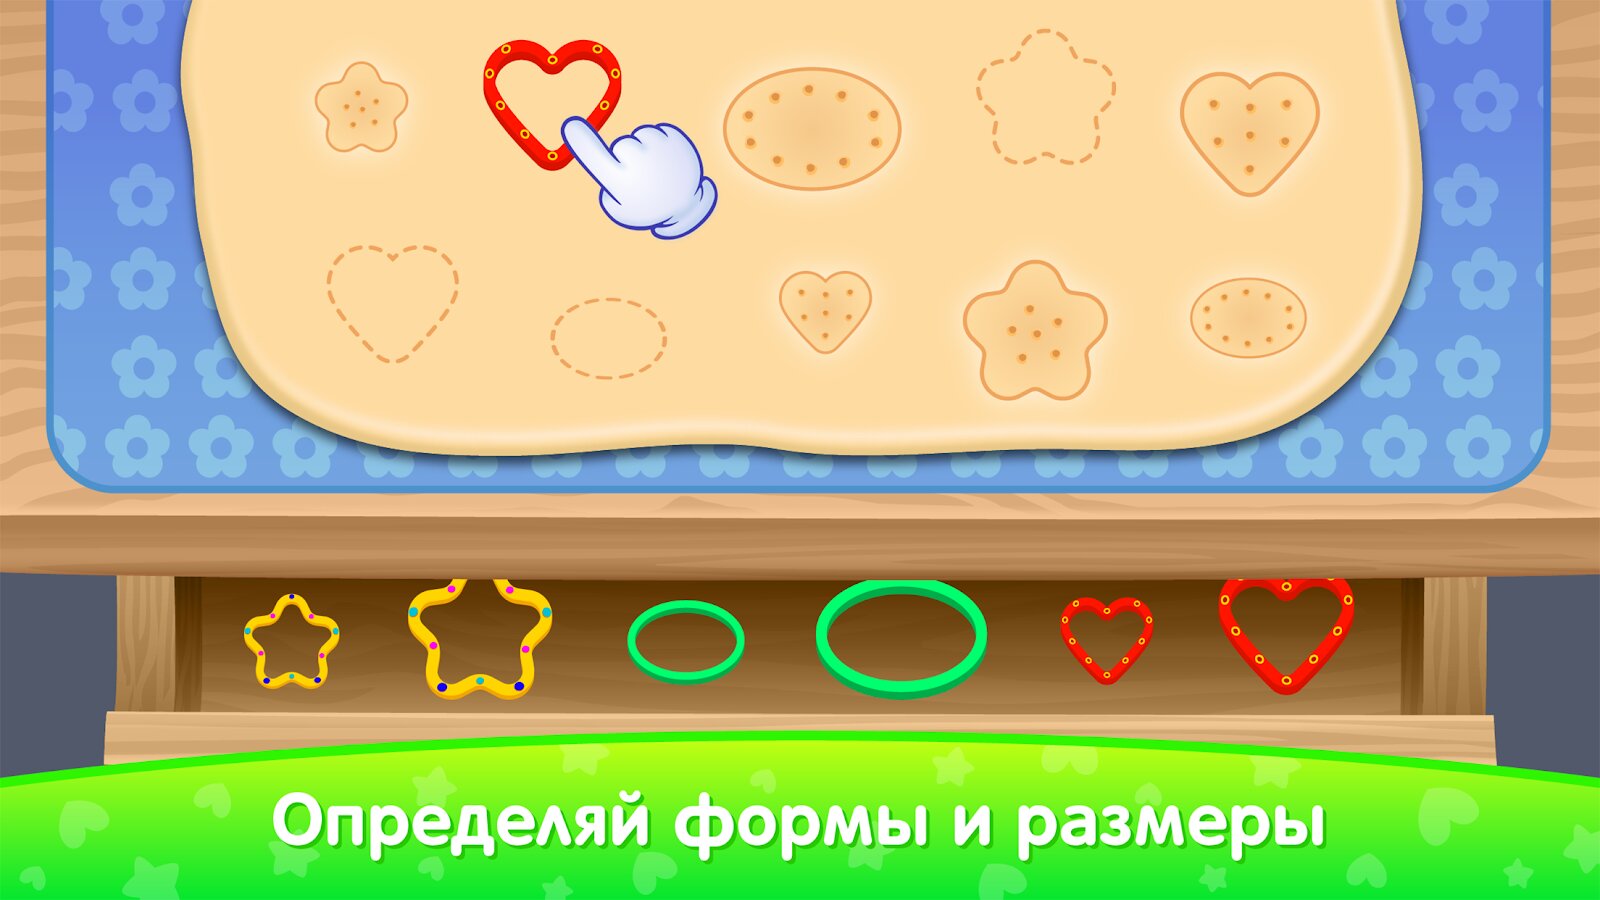 Cut the rope